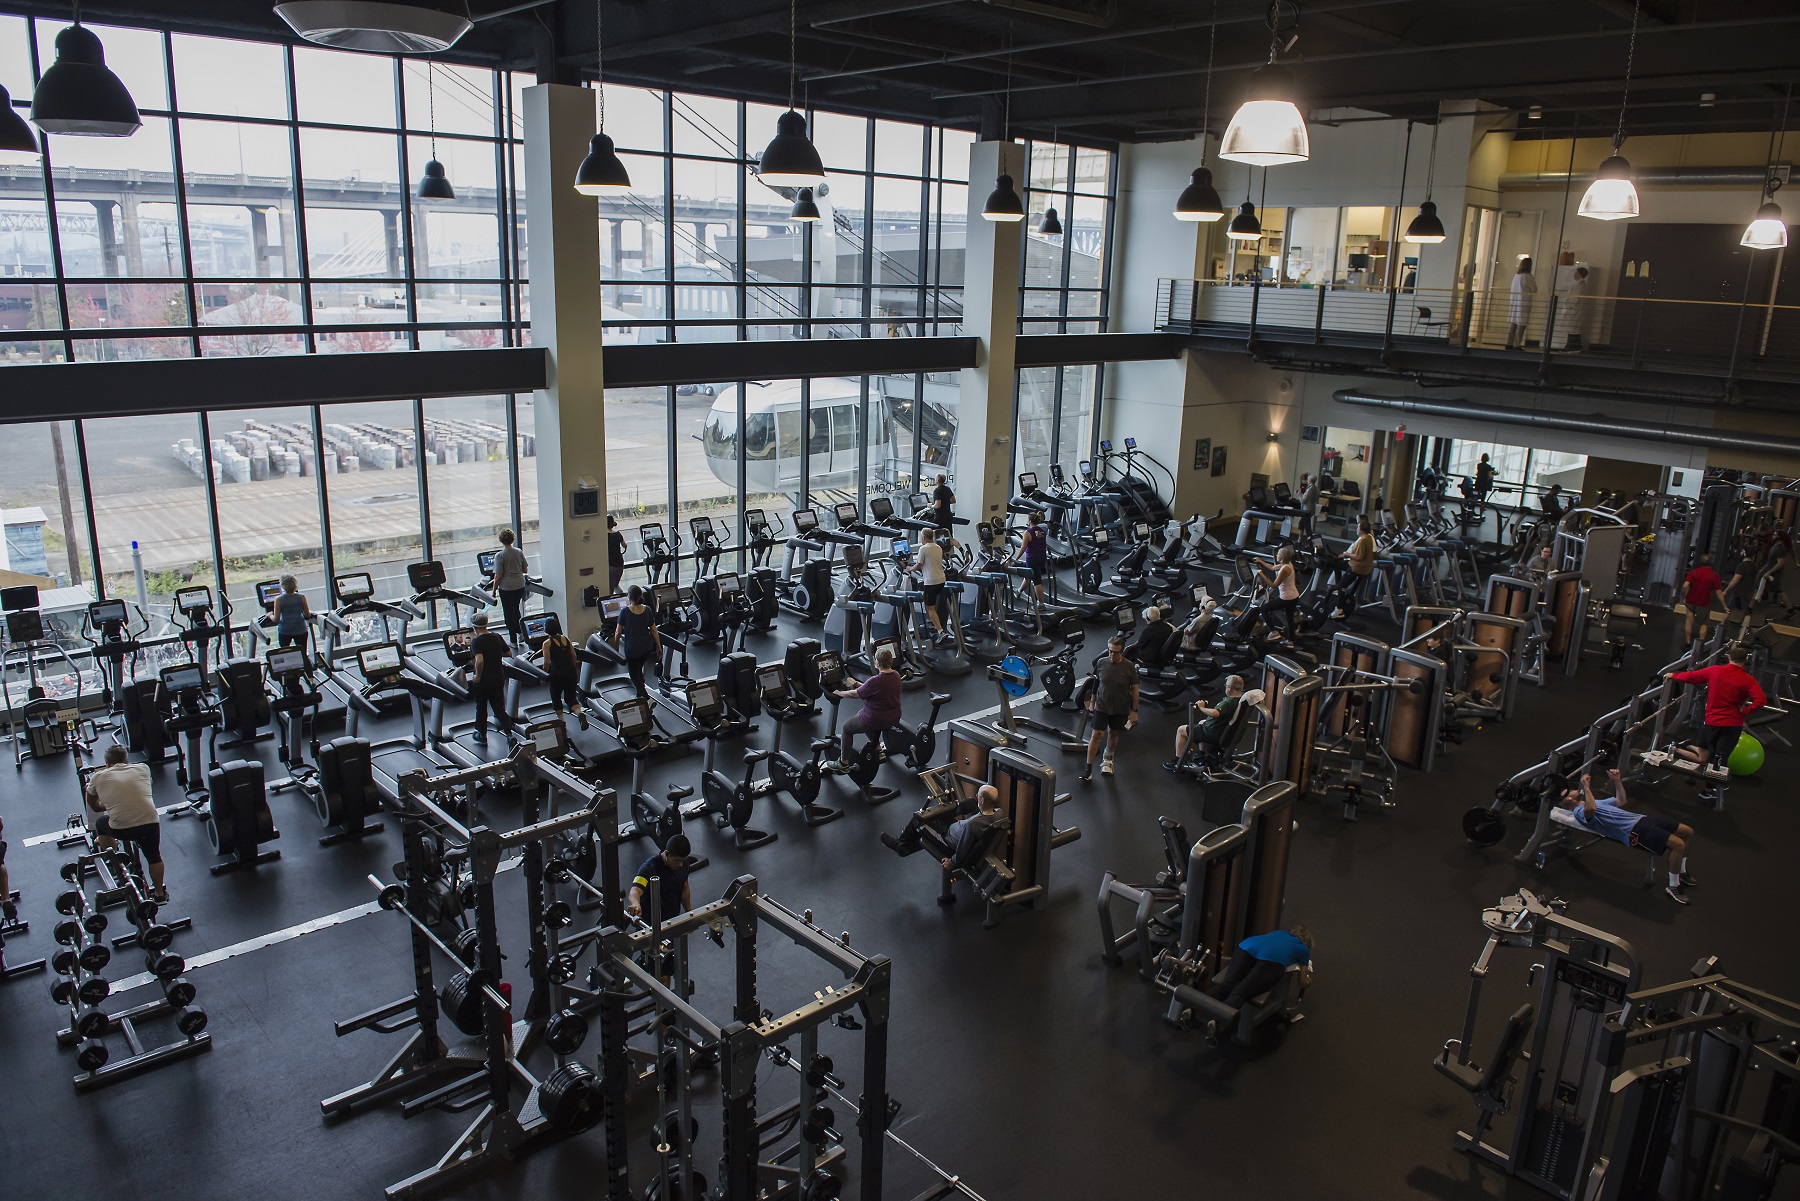 Wide view of fitness floor showing cardiovascular and strength equipment.